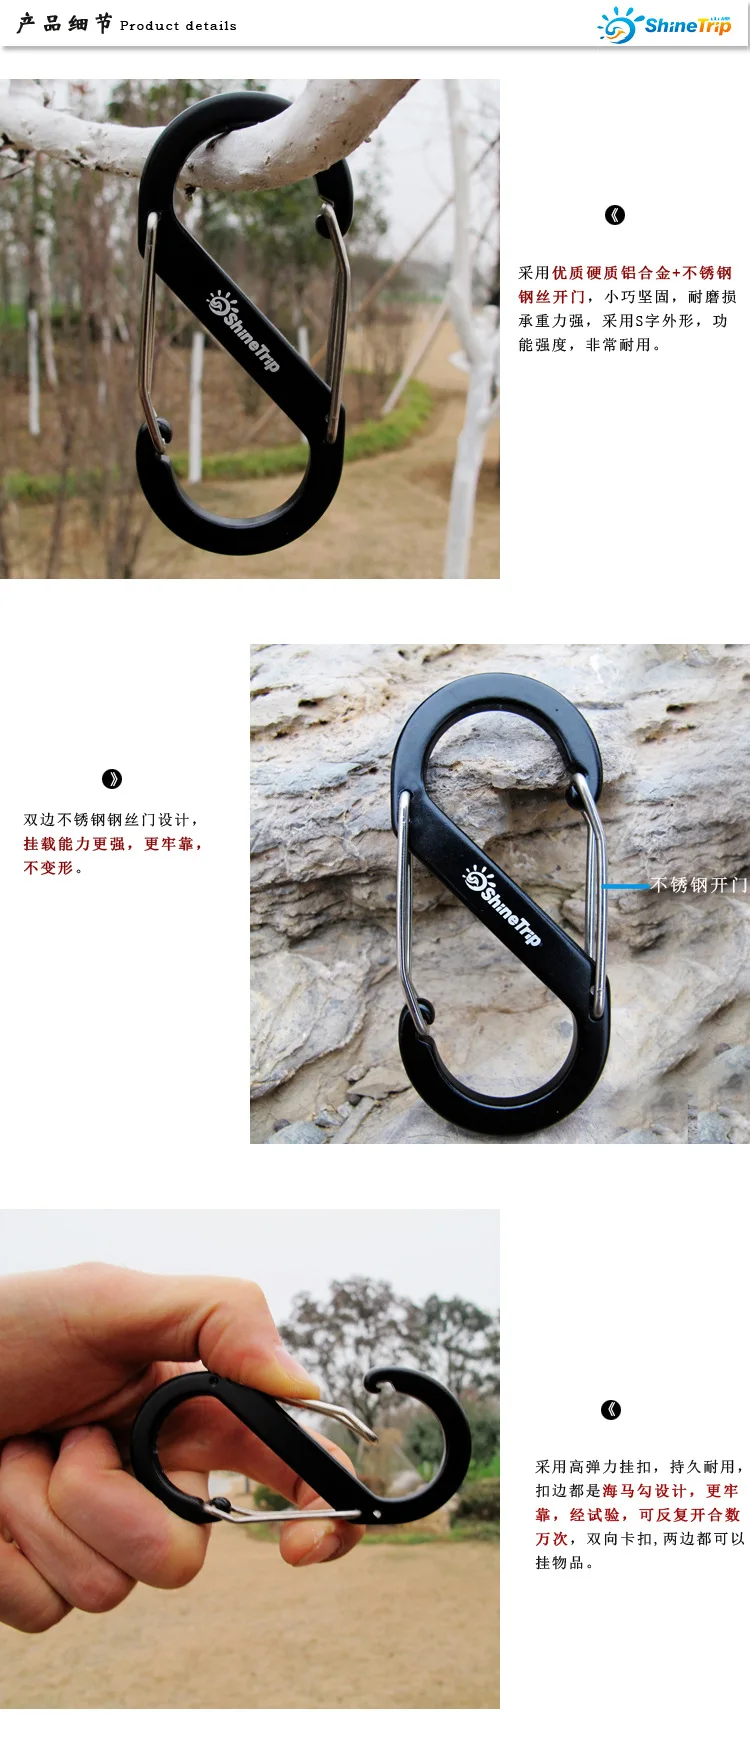 Aluminum S-shaped mountaineering buckle multifunctional 8-shaped quick hanging EDC Keychain outdoor backpack trumpet